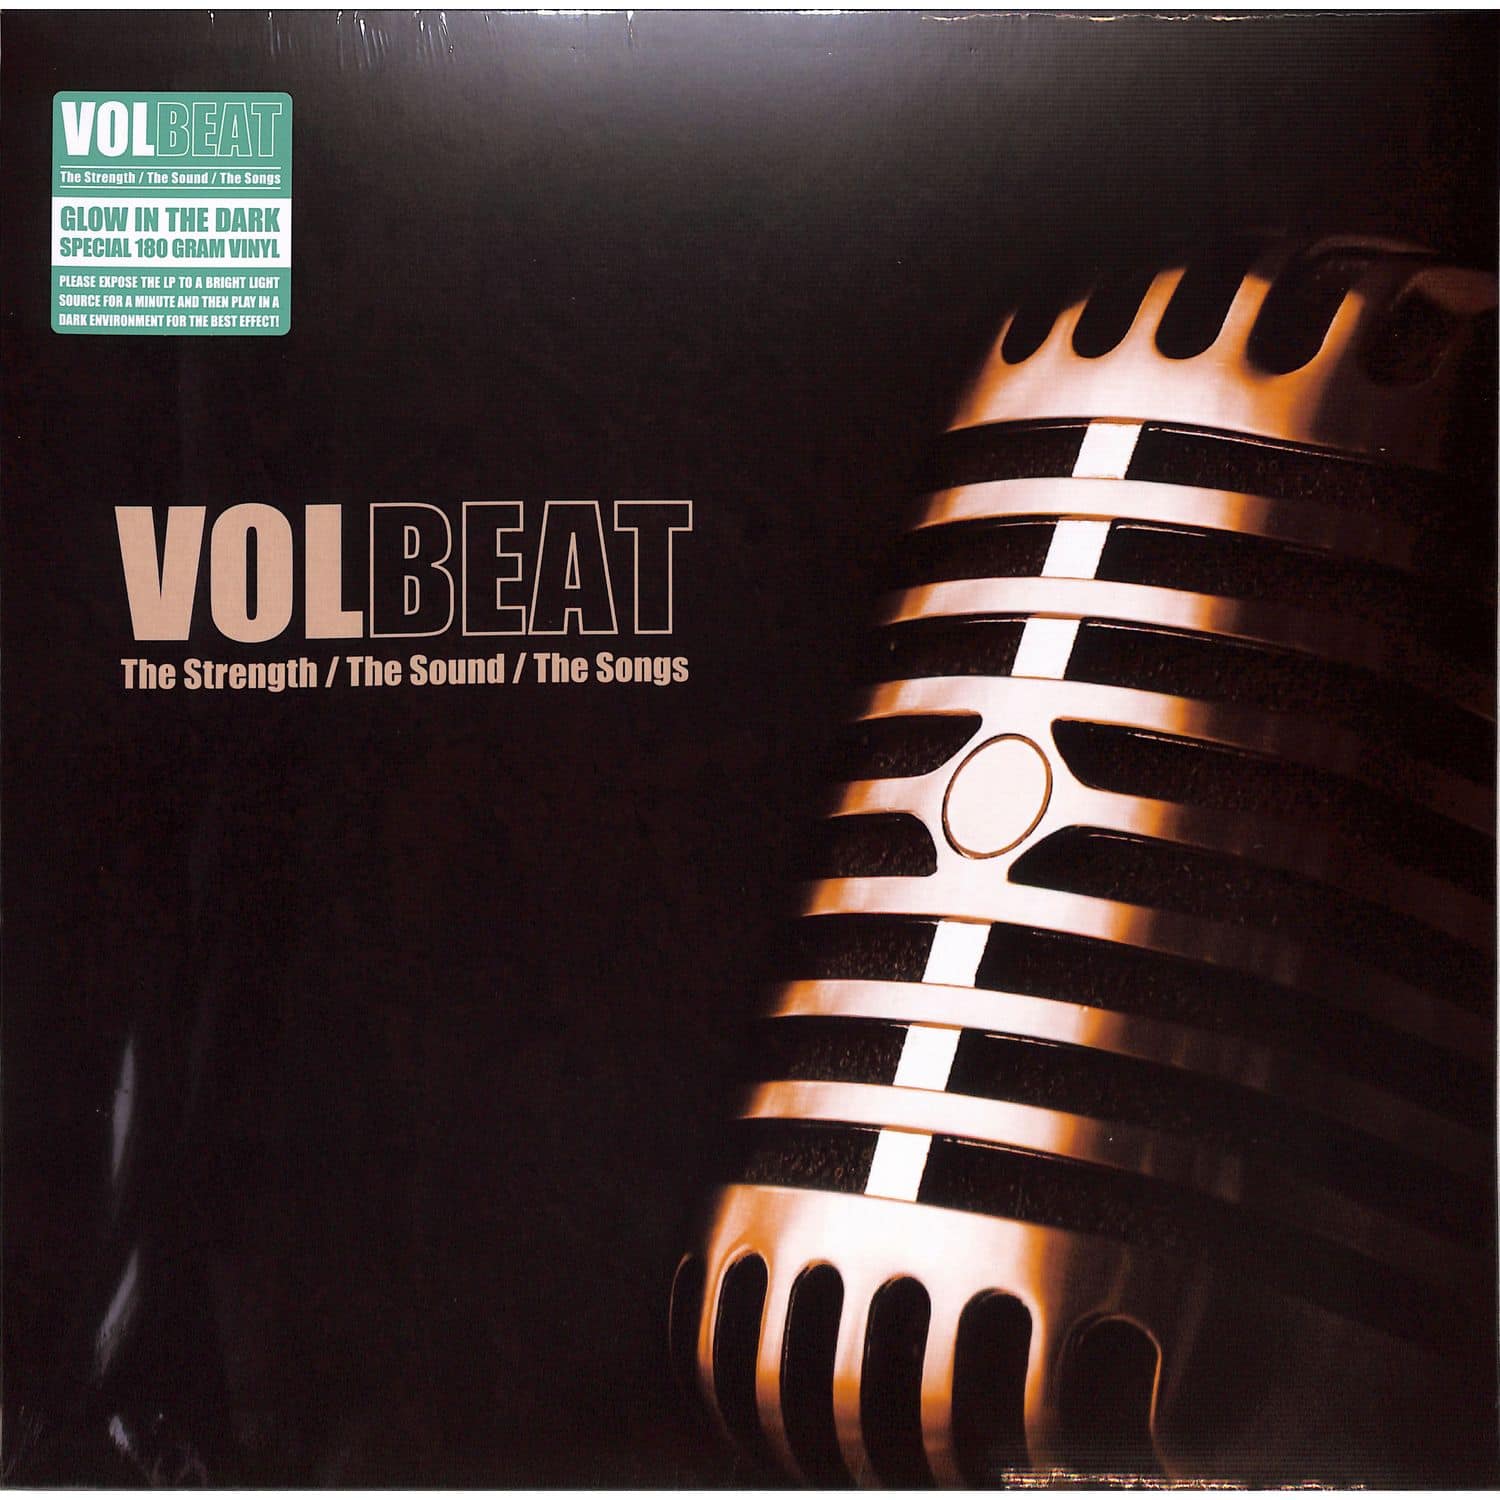 Volbeat - THE STRENGTH/THE SOUND/THE SONGS